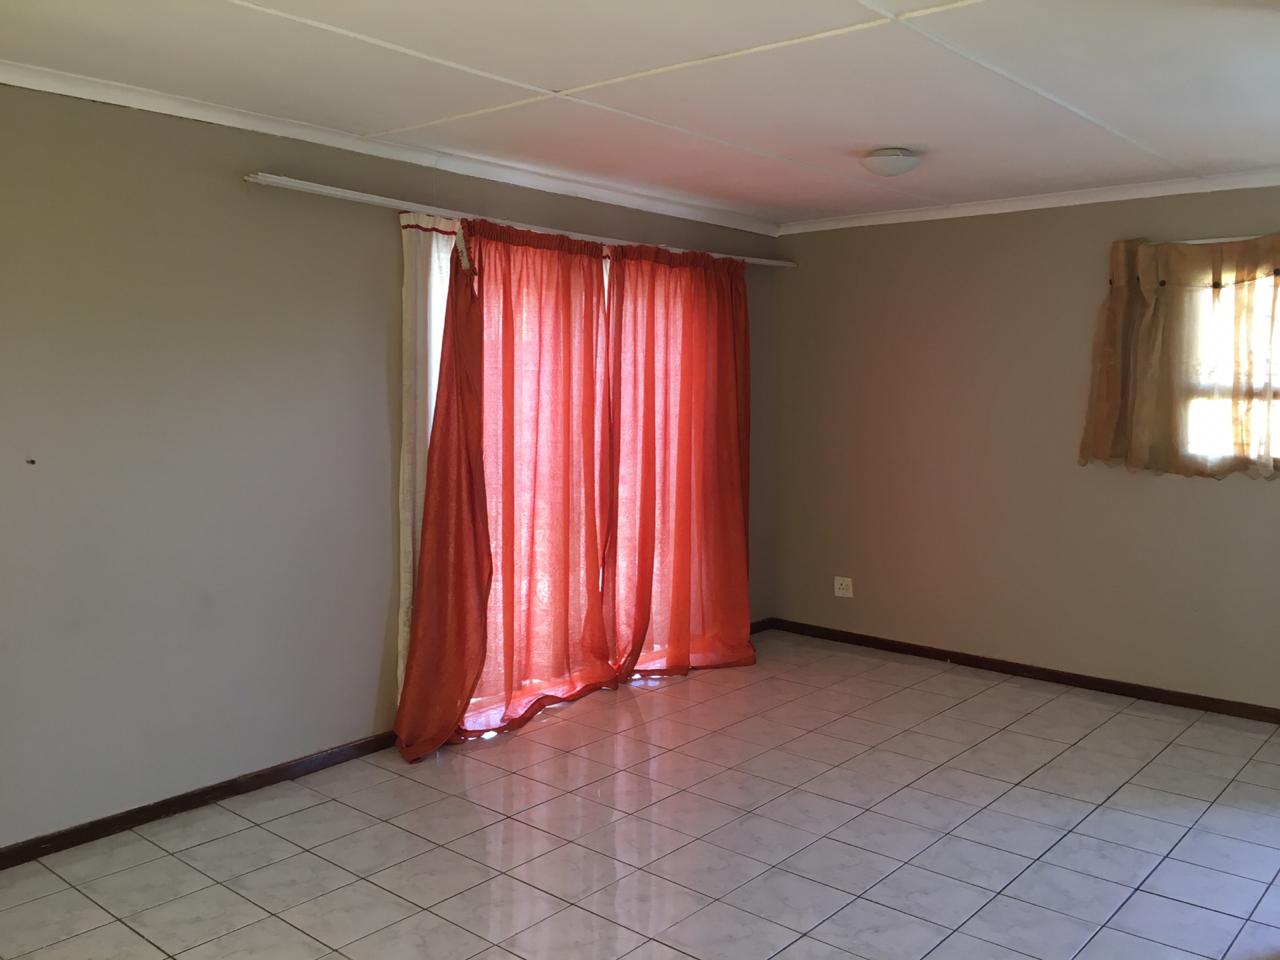 To Let 3 Bedroom Property for Rent in Amalinda Eastern Cape